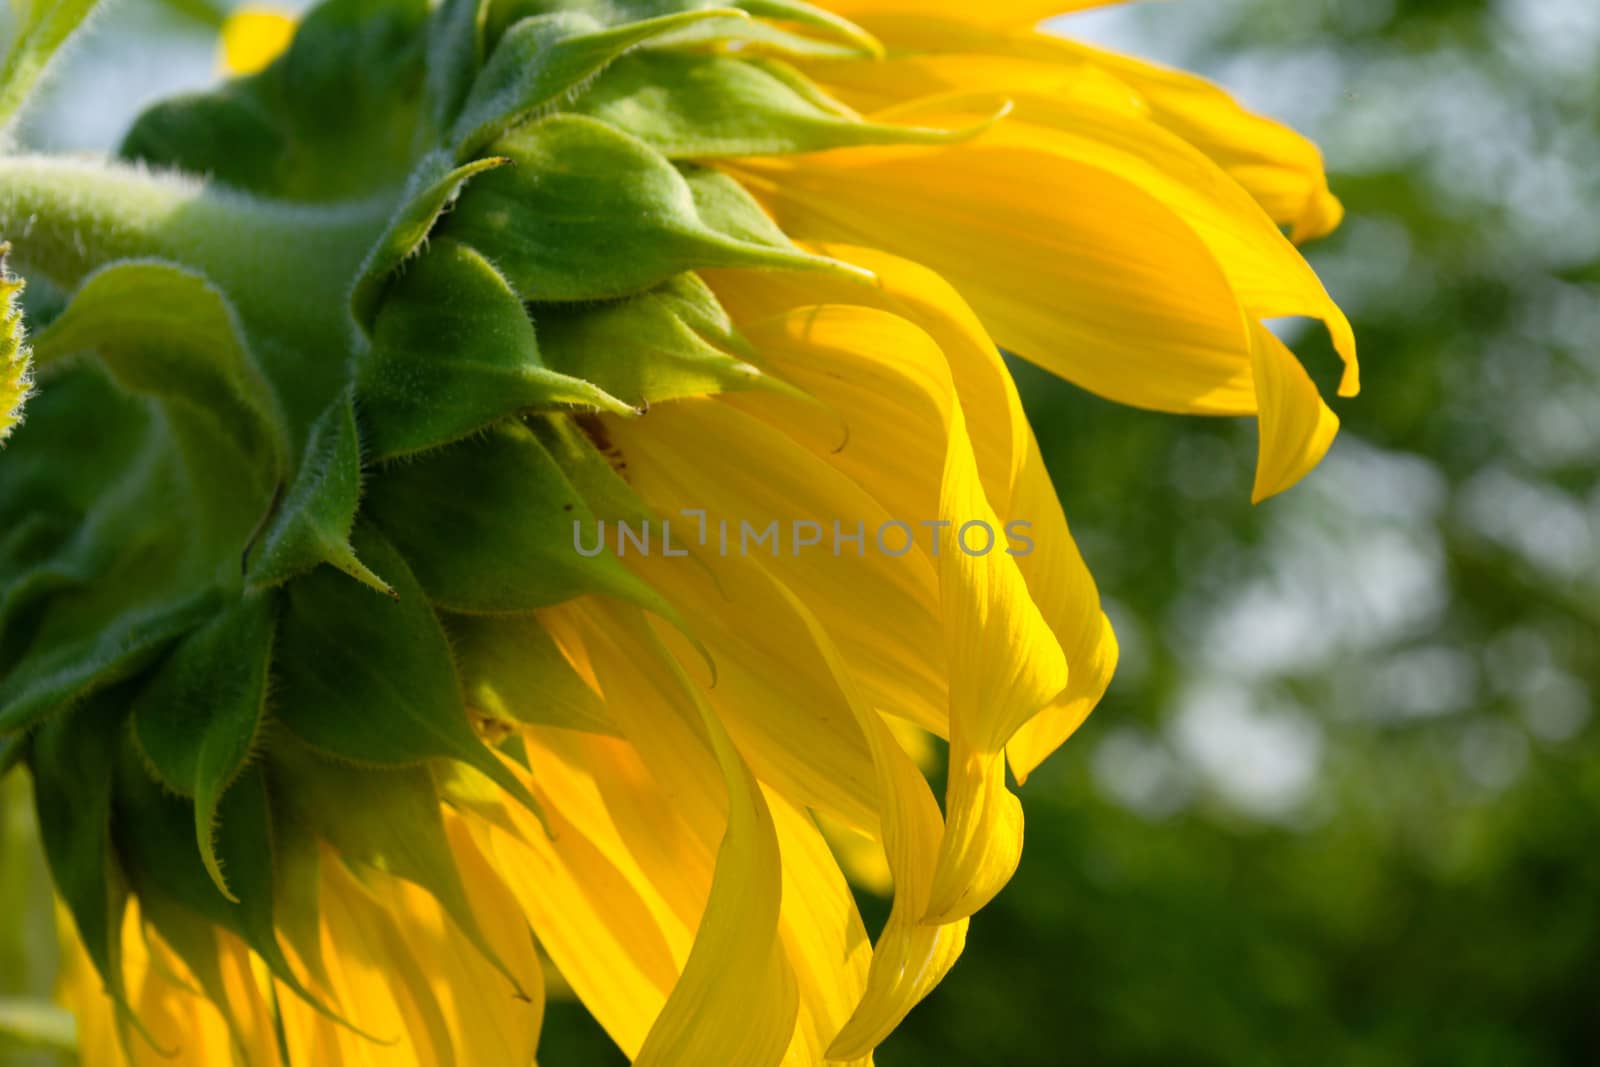 Sunflower is blossoming in the gardens .